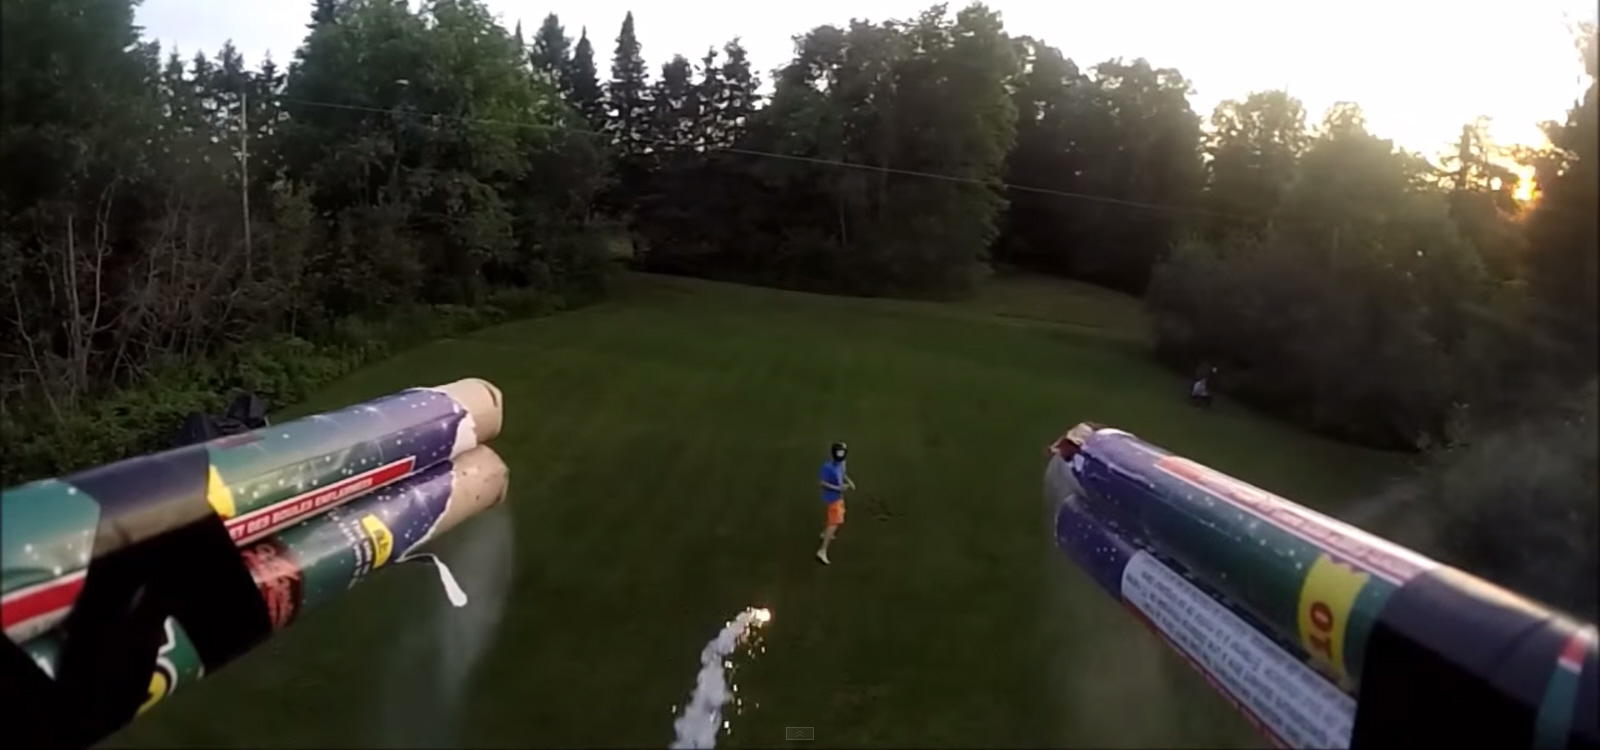 Watch A Drone Bombard Volunteers With Roman Candles